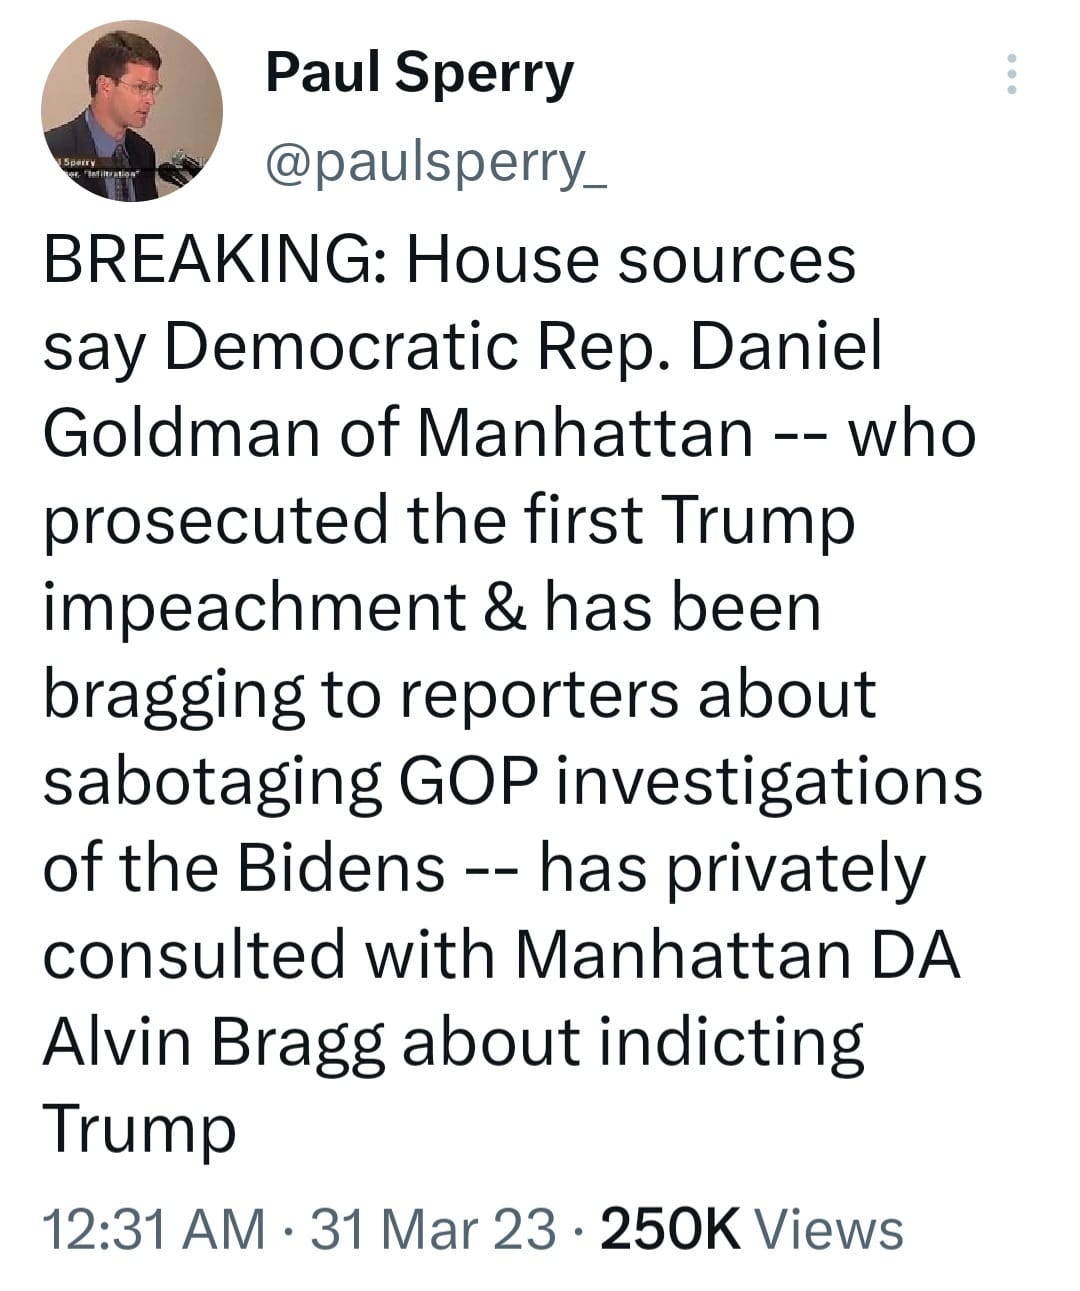 May be a Twitter screenshot of 1 person and text that says 'Paul Sperry @puprry_ BREAKING: House sources say Democratic Rep. Daniel Goldman of Manhattan who prosecuted the first Trump impeachment & has been bragging to reporters about sabotaging GOP investigations of the Bidens has privately consulted with Manhattan DA Alvin Bragg about indicting Trump 12:31 AM 31 Mar 23 250K Views'